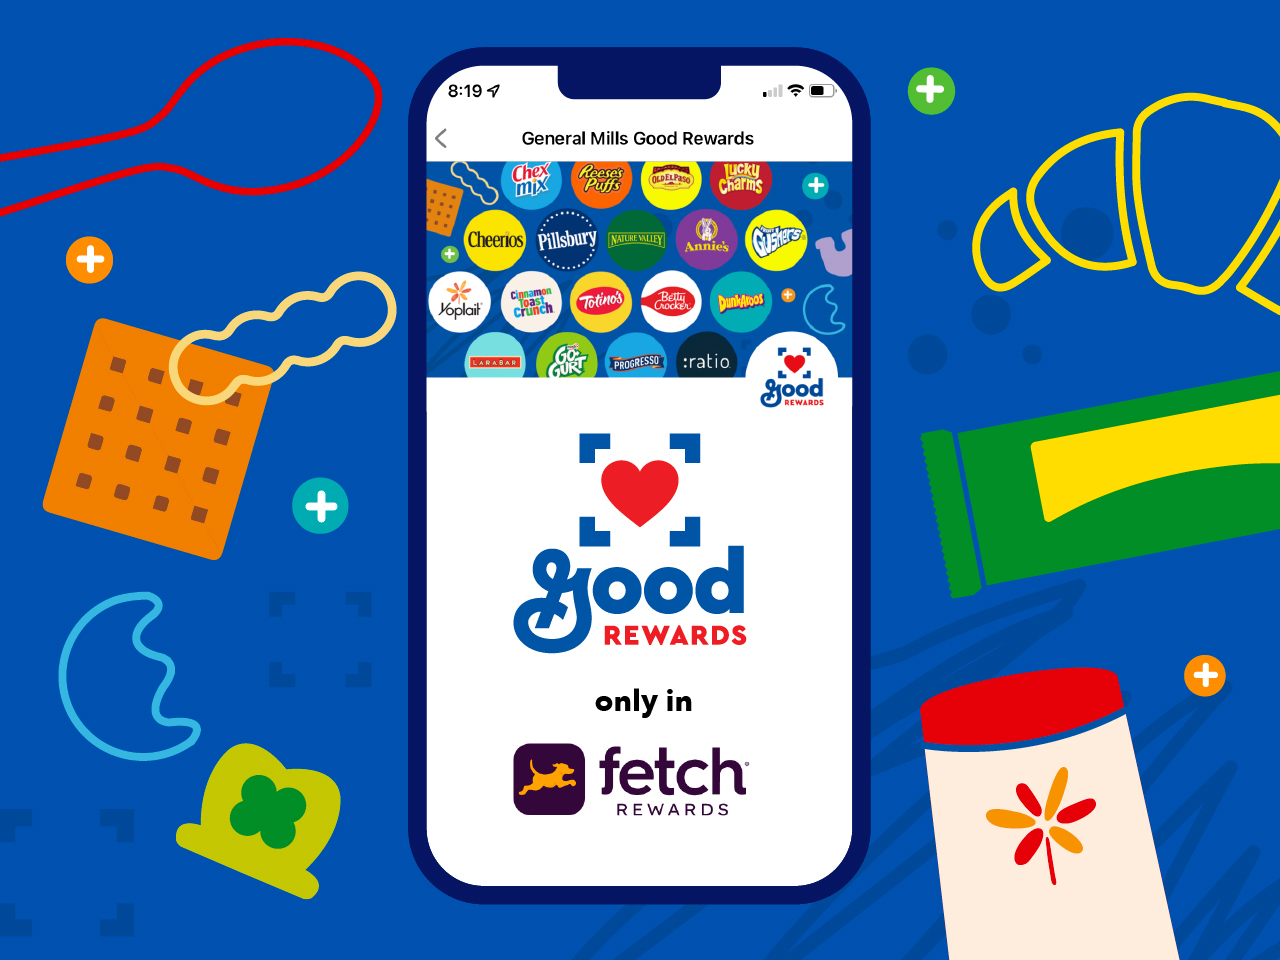 General Mills Partners with Fetch to Launch New